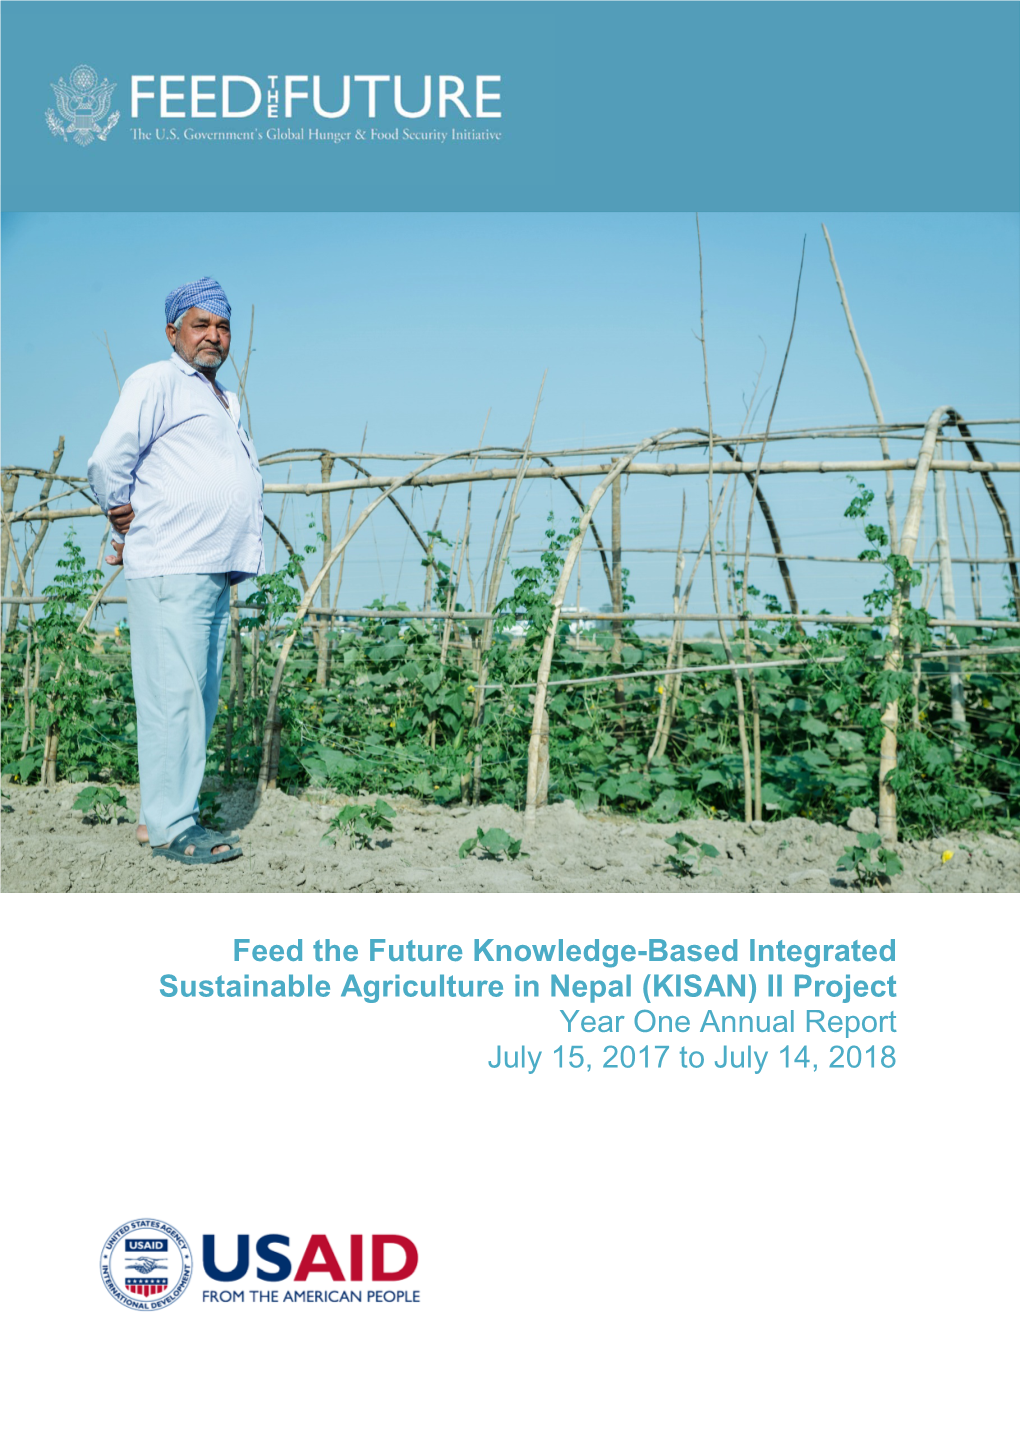 Based Integrated Sustainable Agriculture in Nepal (KISAN) II Project Year One Annual Report July 15, 2017 to July 14, 2018